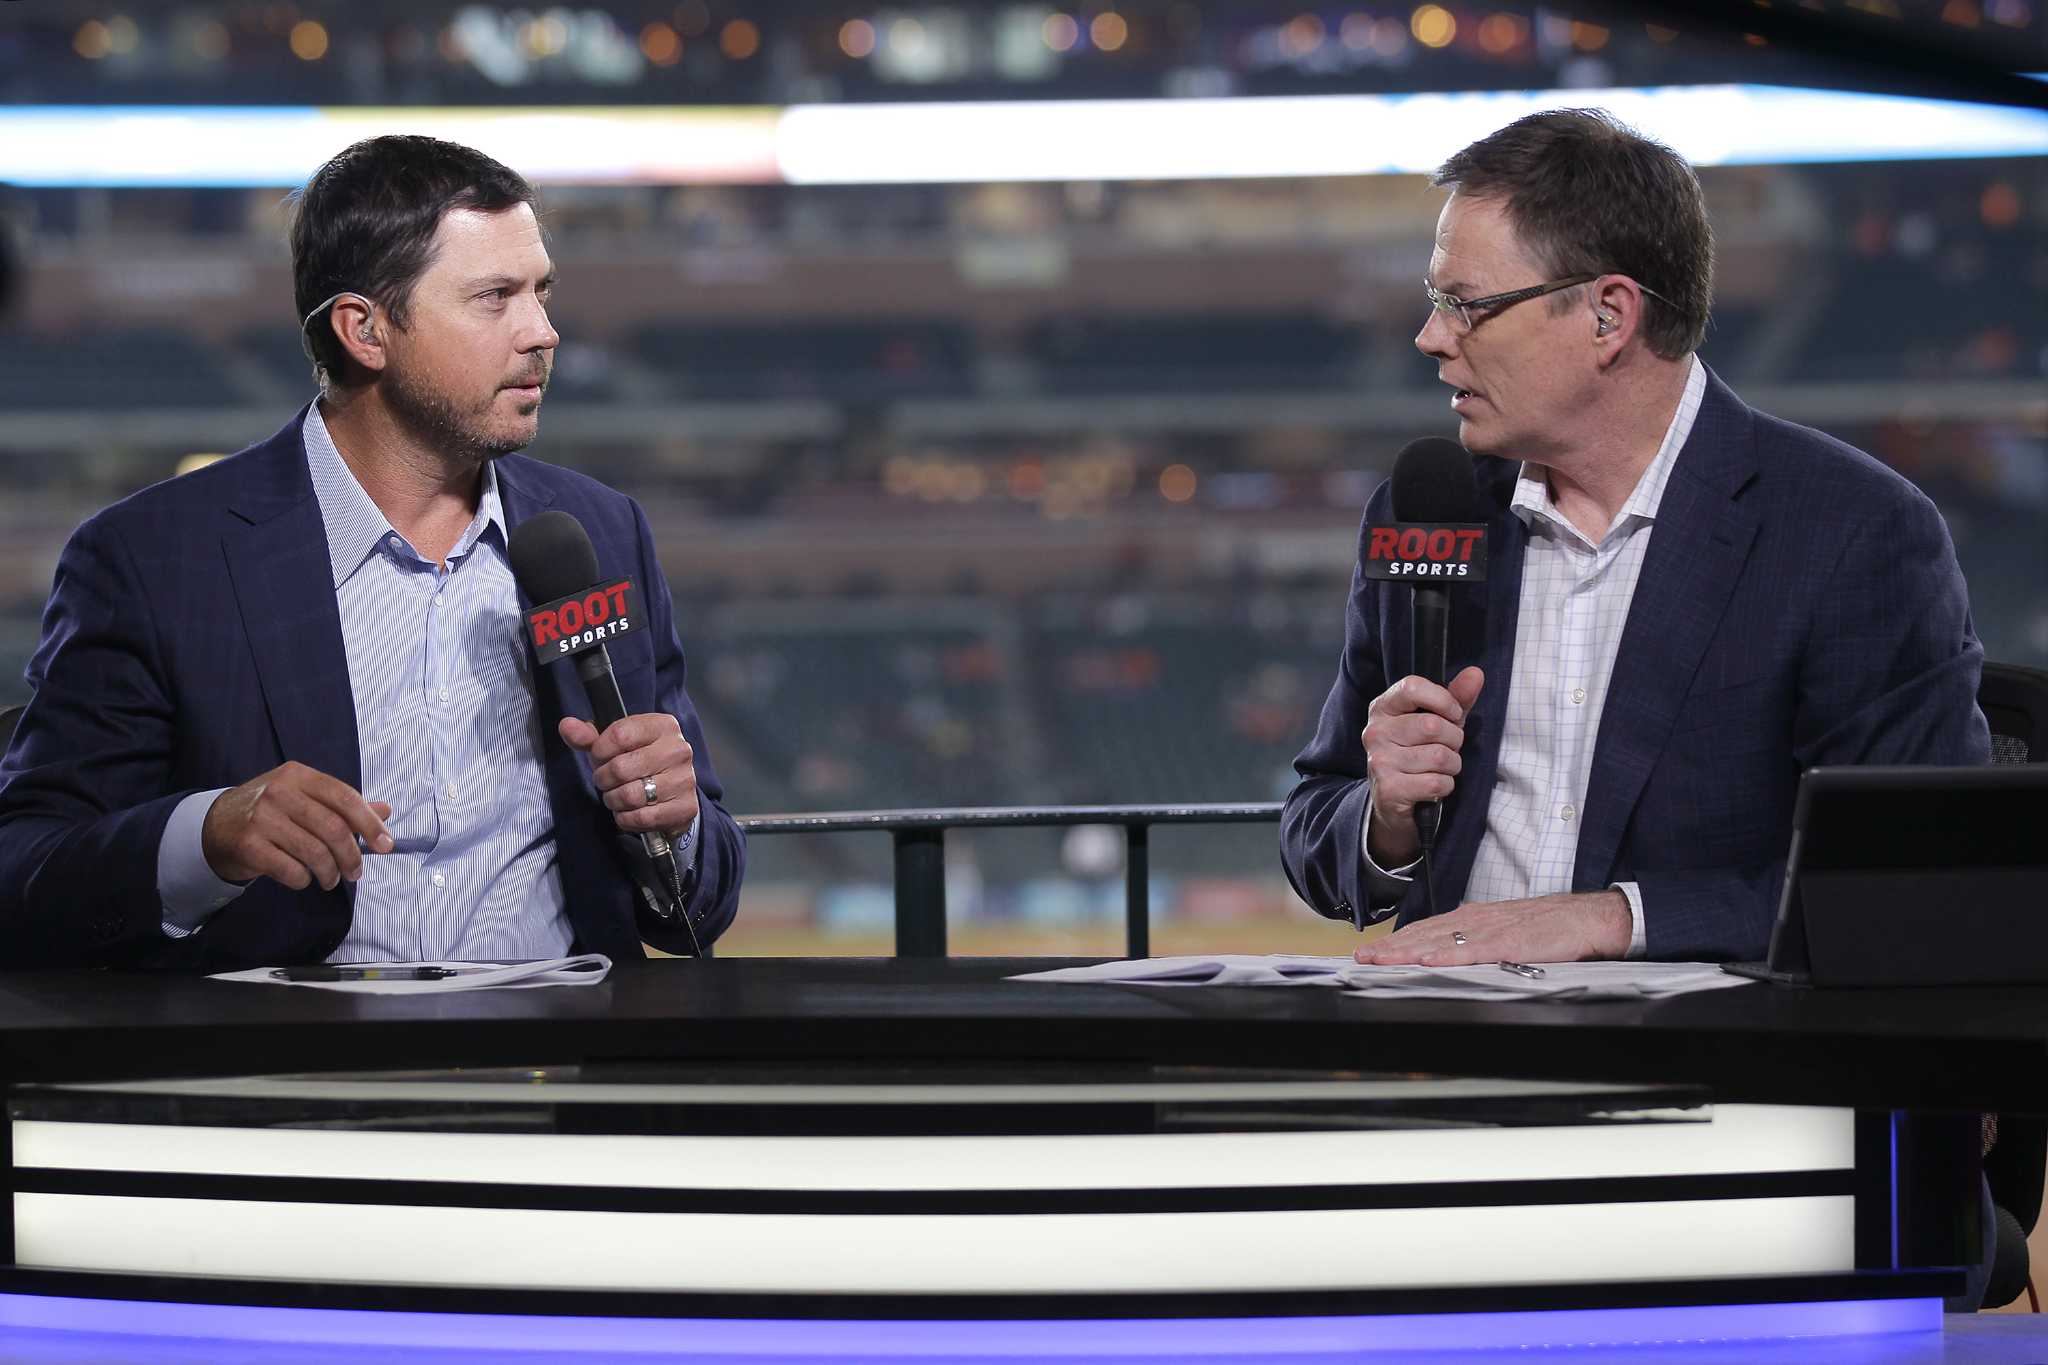 On TV/Radio: Ex-pitcher Josh Beckett dives into new role as Astros